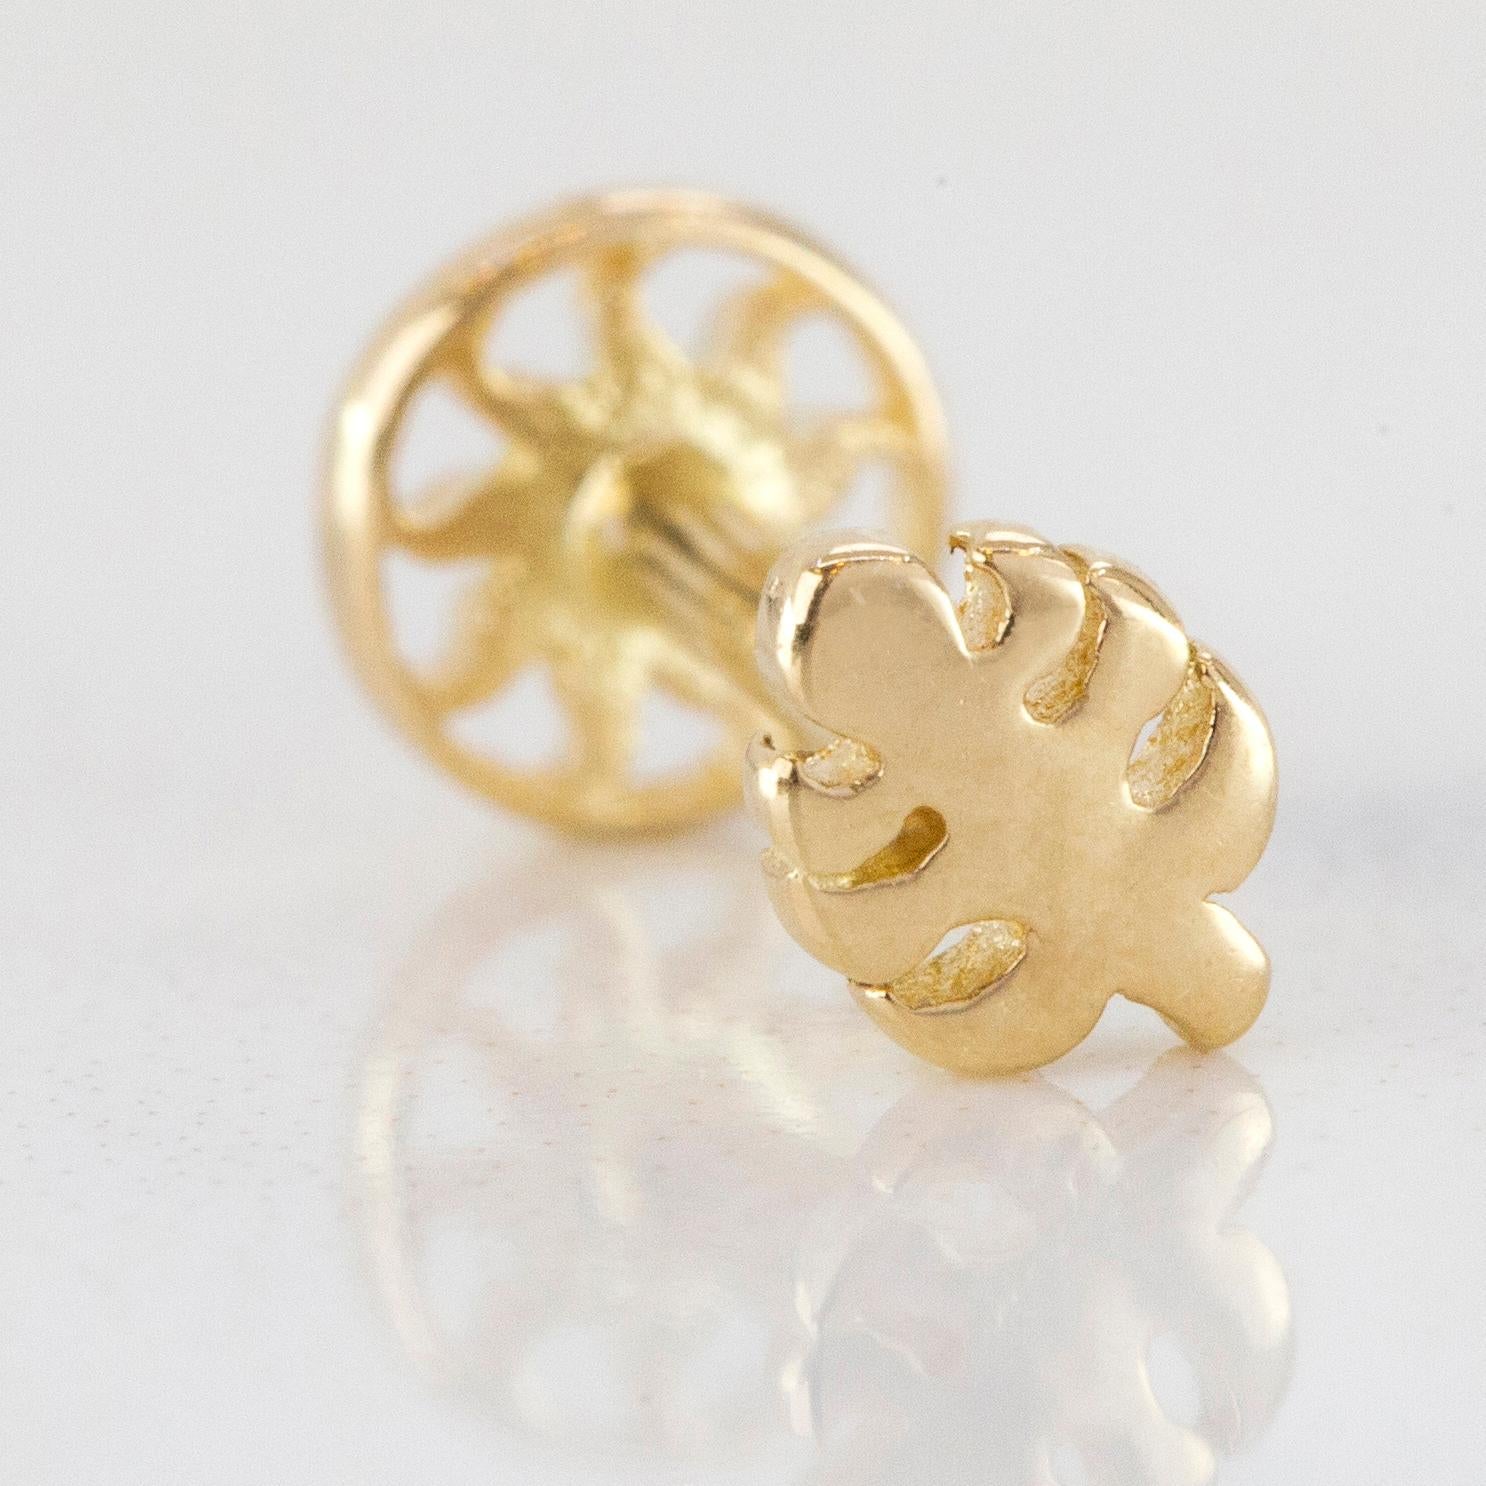 14K Gold Monstera Leaf Piercing, Gold Monstera Earring

You can use the piercing as an earring too! Also this piercing is suitable for tragus, nose, helix, lobe, flat, medusa, monreo, labret and stud.

This piercing was made with quality materials